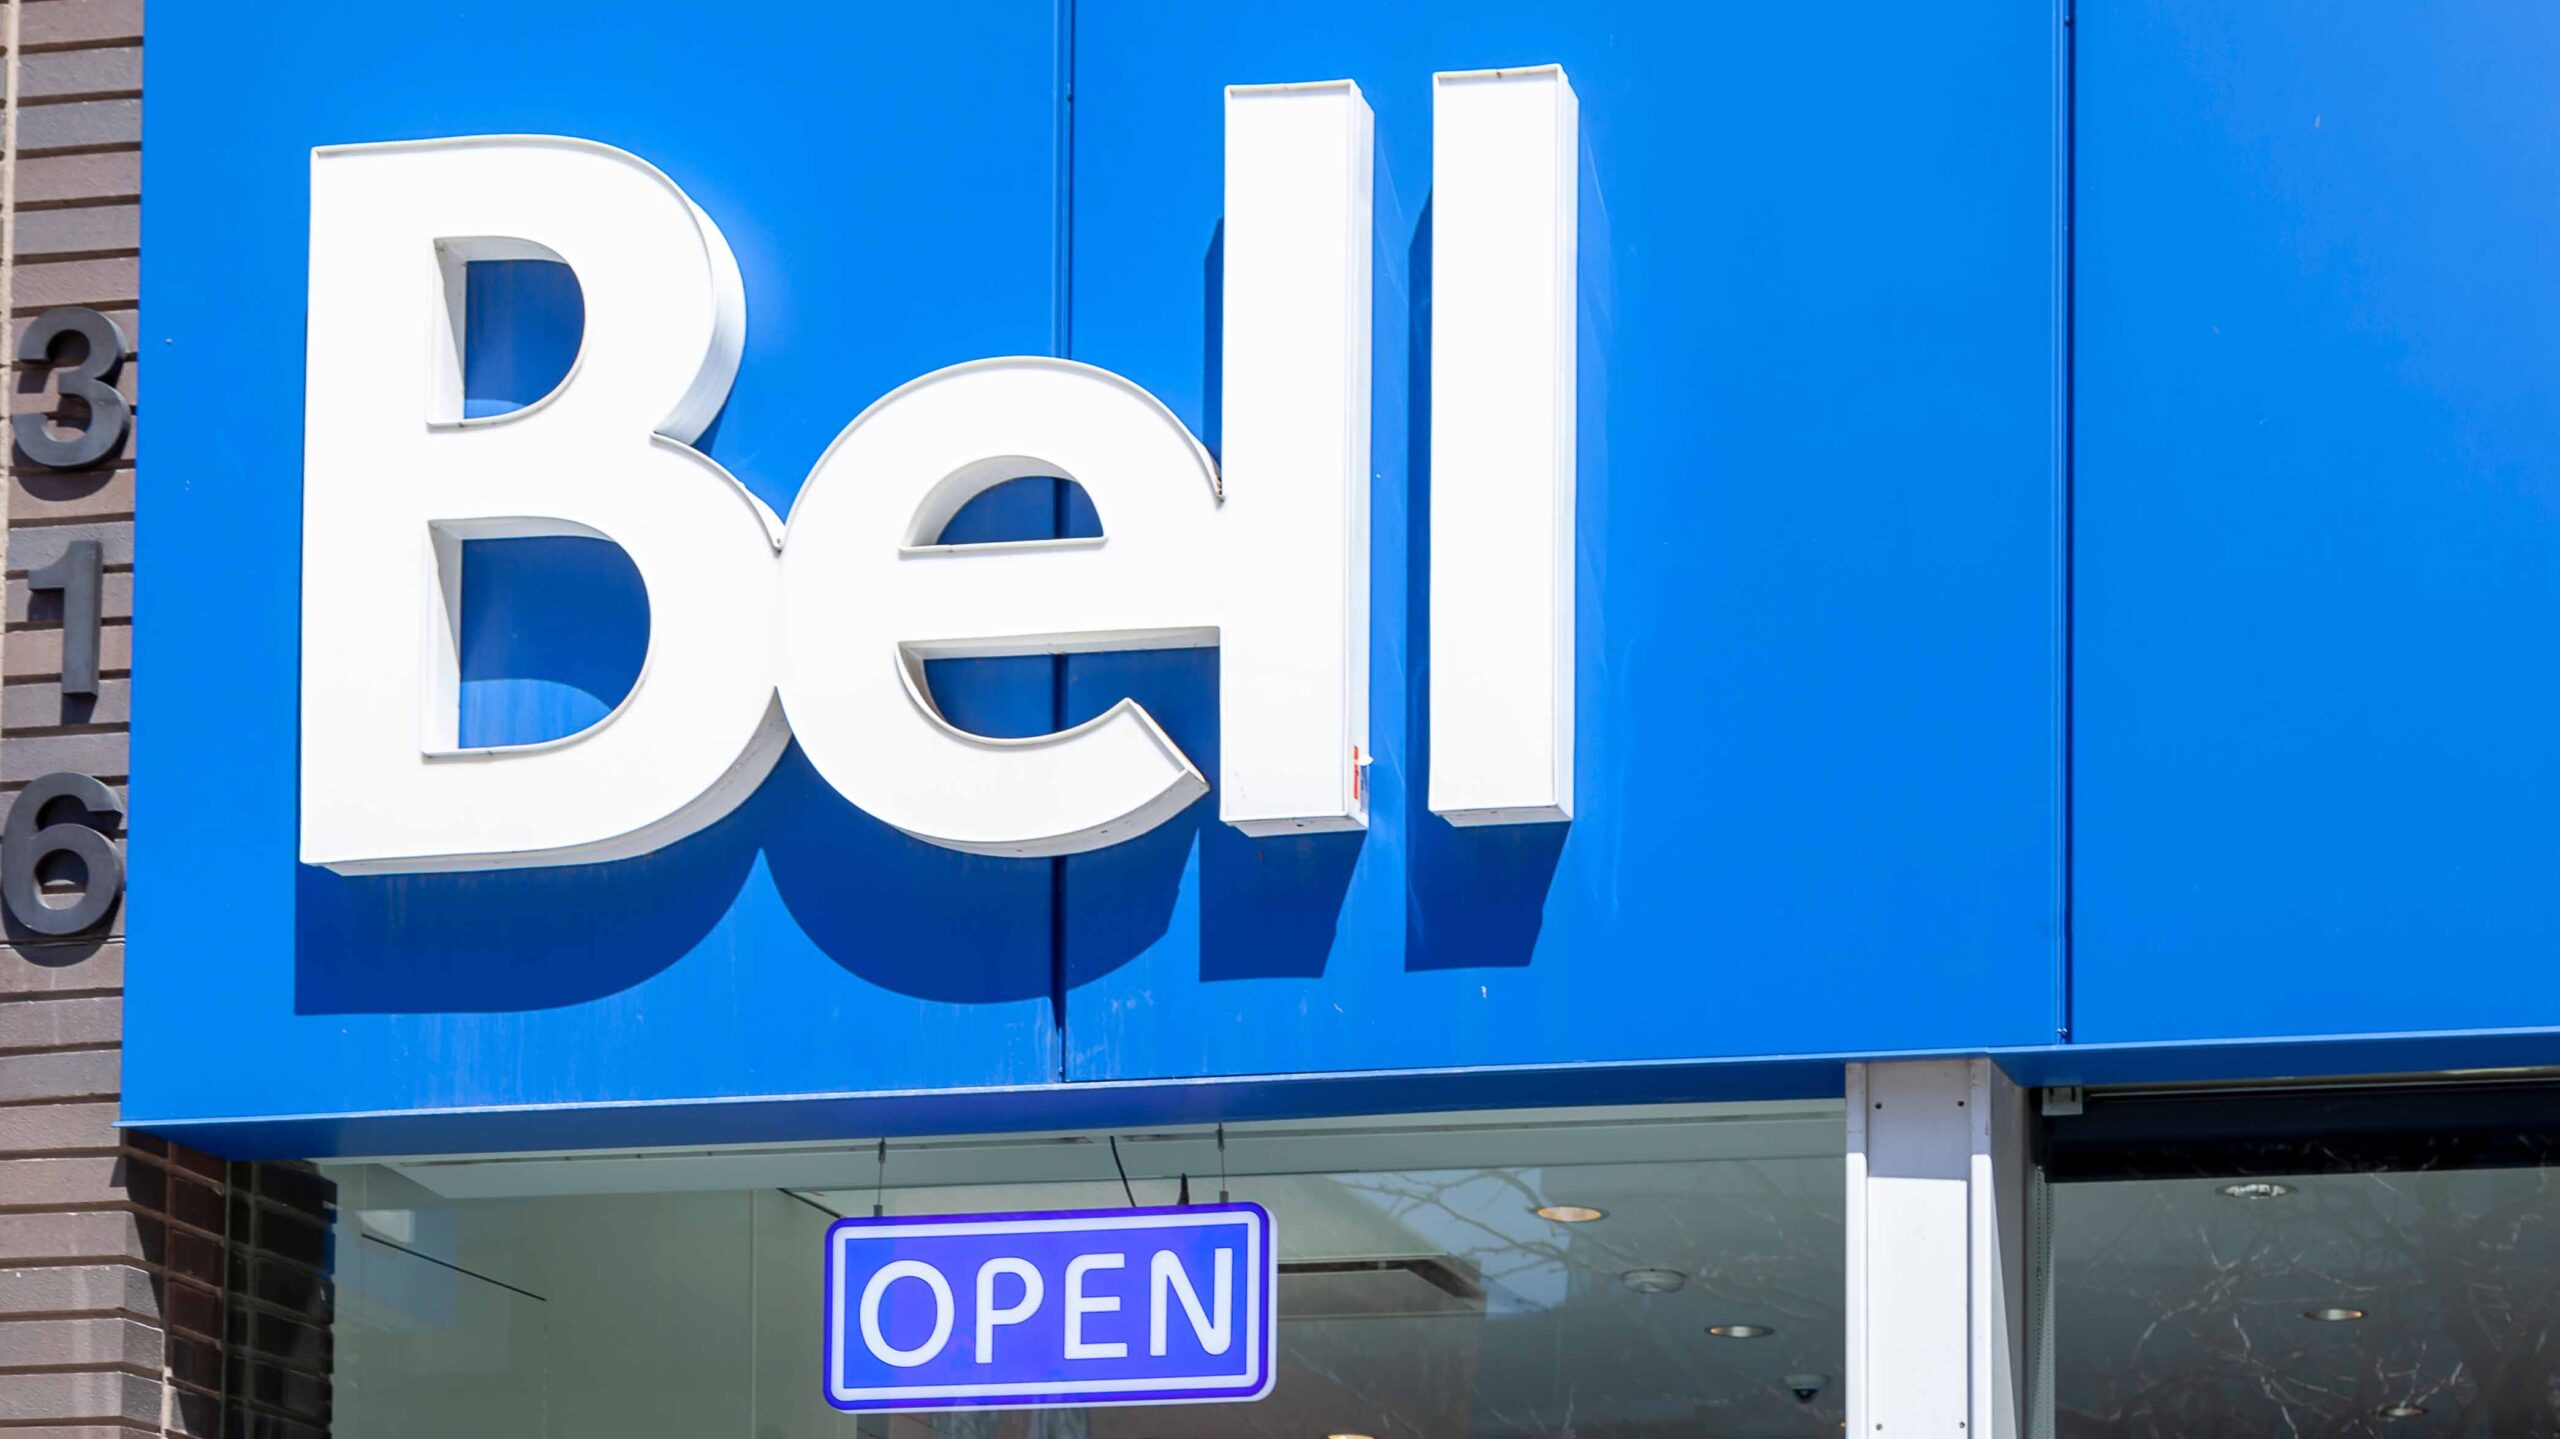 Bell reduces Essential and Ultimate plans by 50GB, prices remain. 26